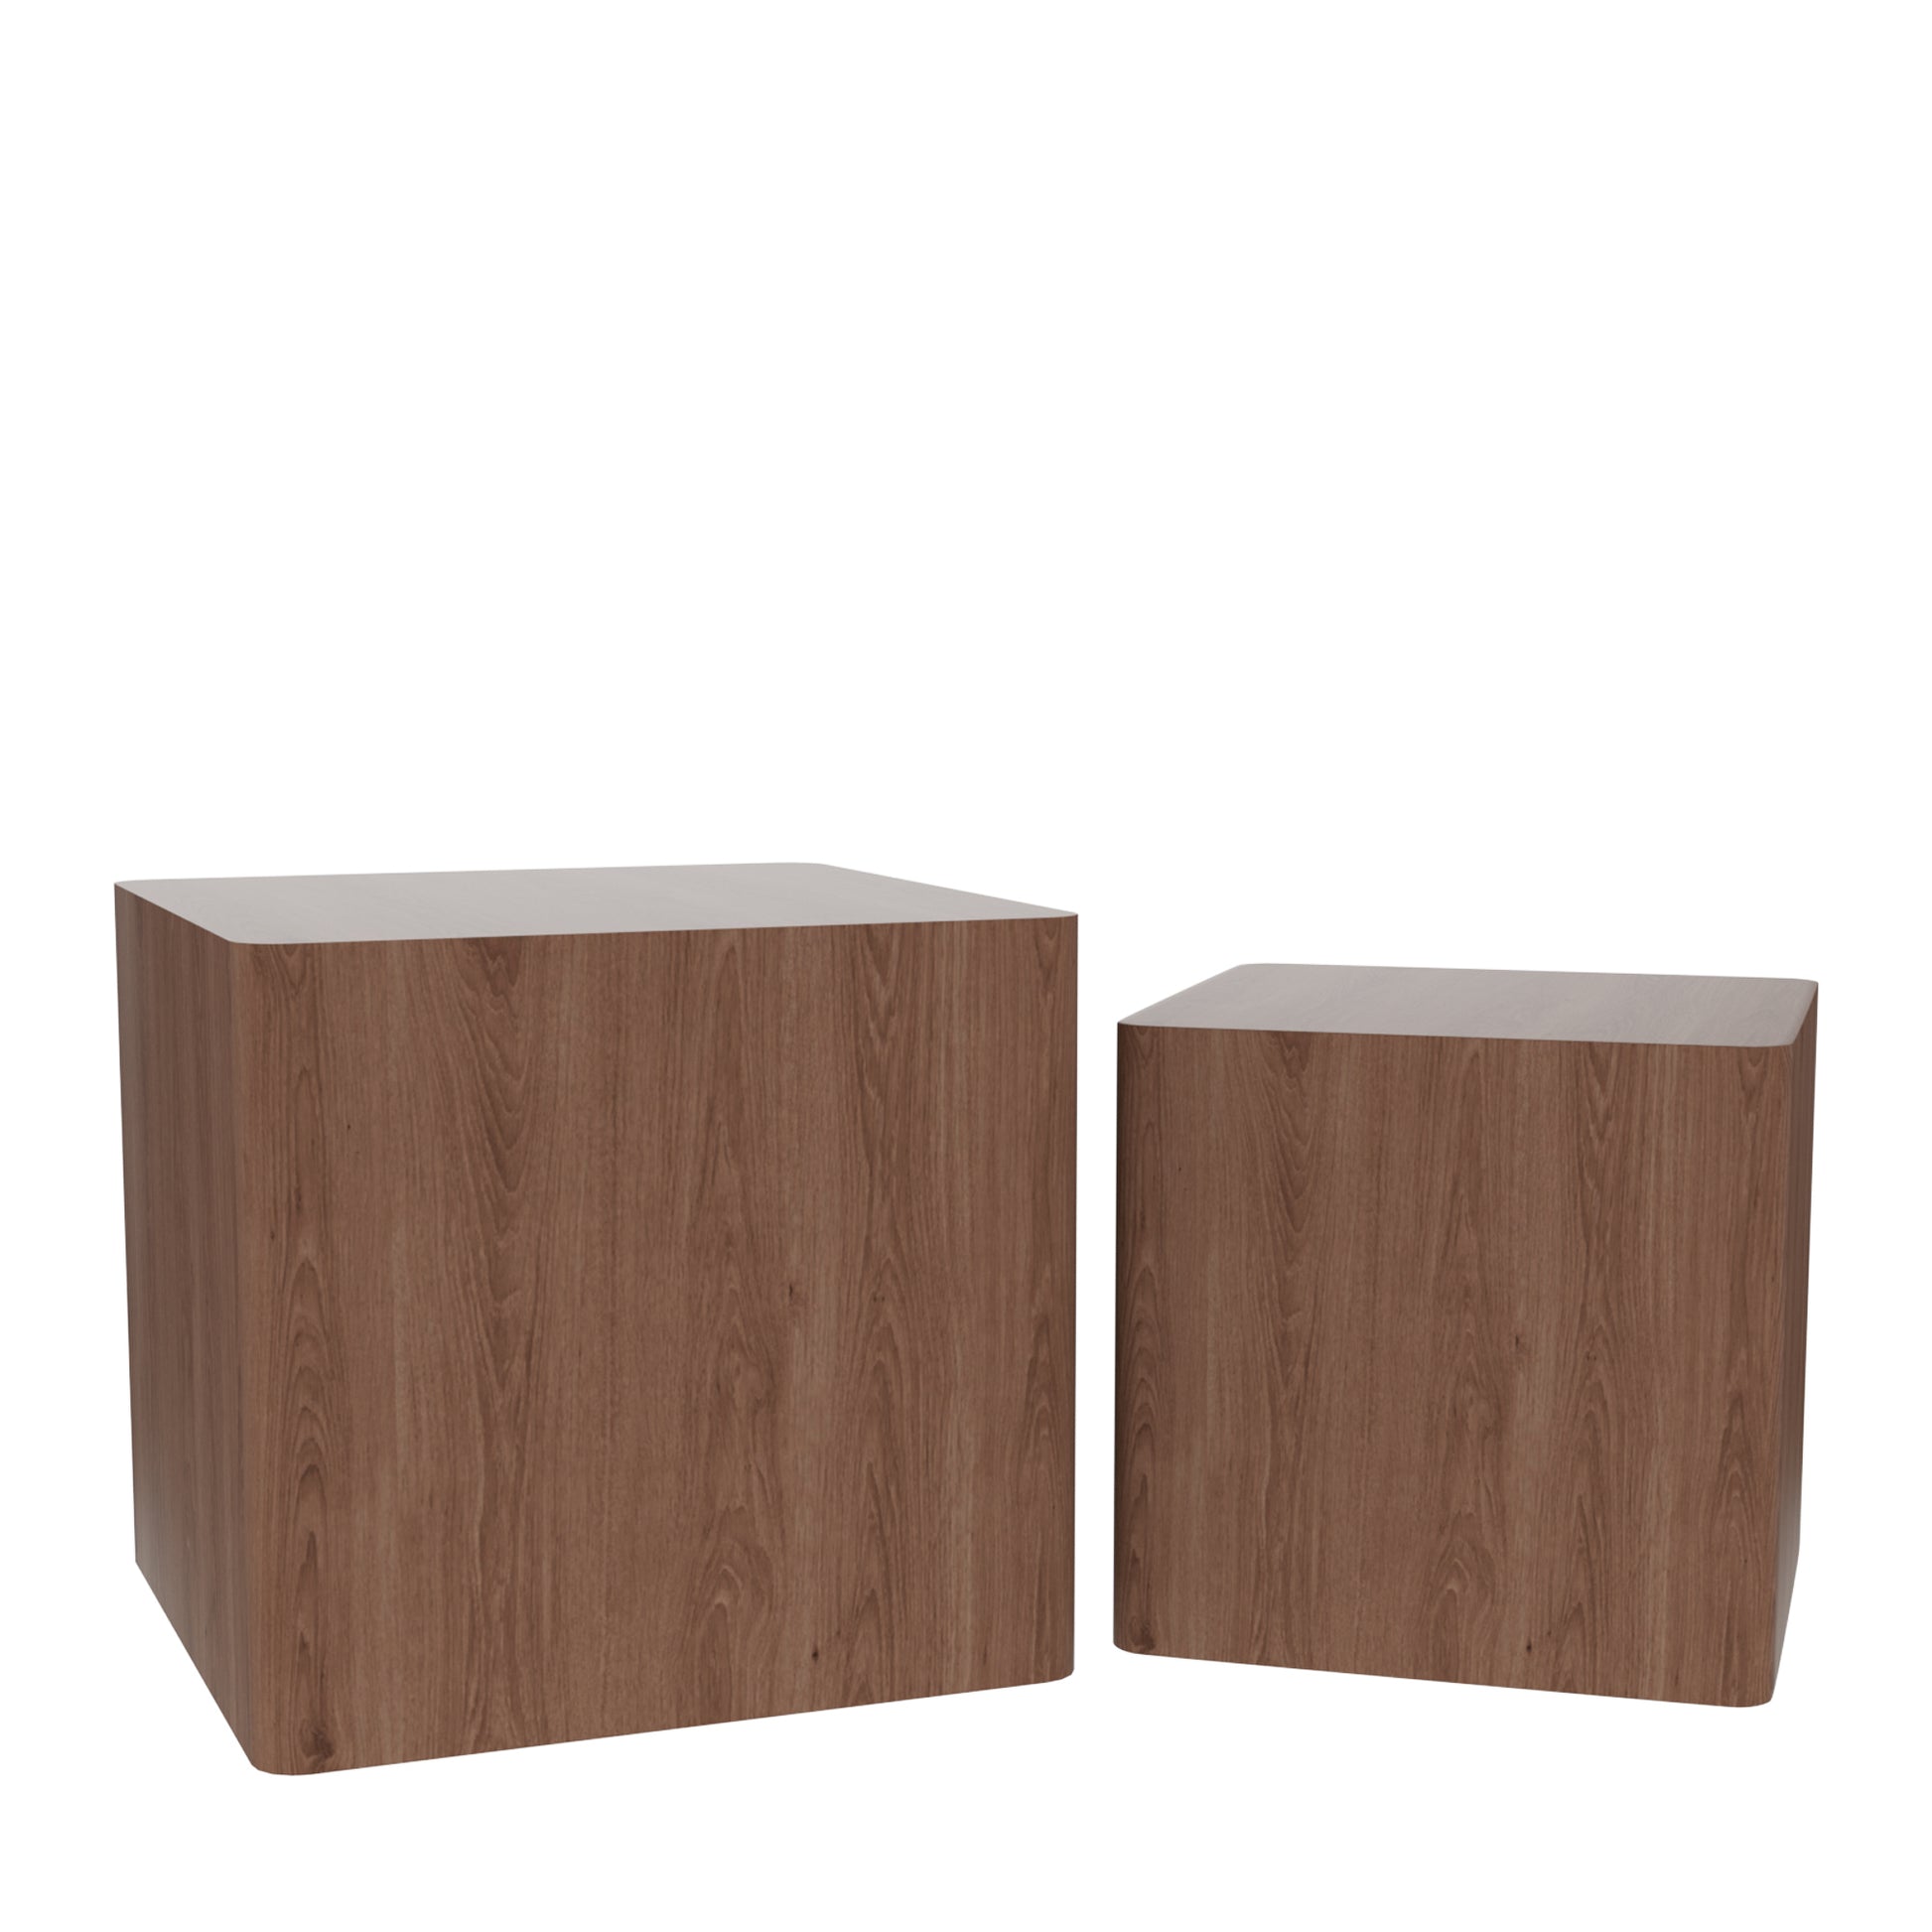 Set of 2 Square Nesting Accent Tables in Walnut